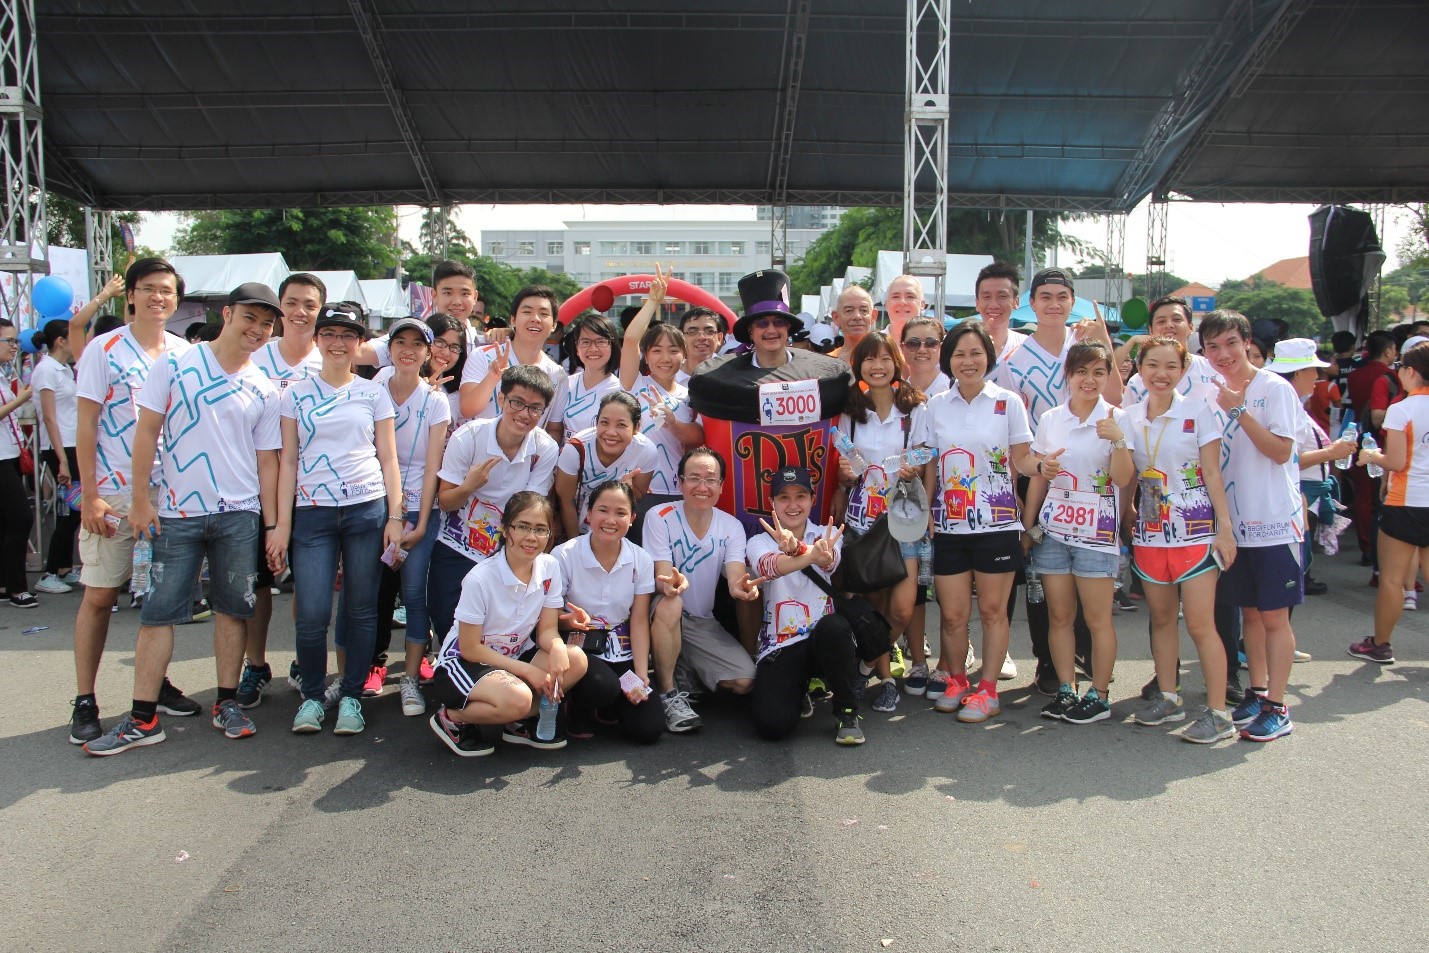 TRG’s Staffs Join The BBGV Fun Run To Raise Fund For Charity